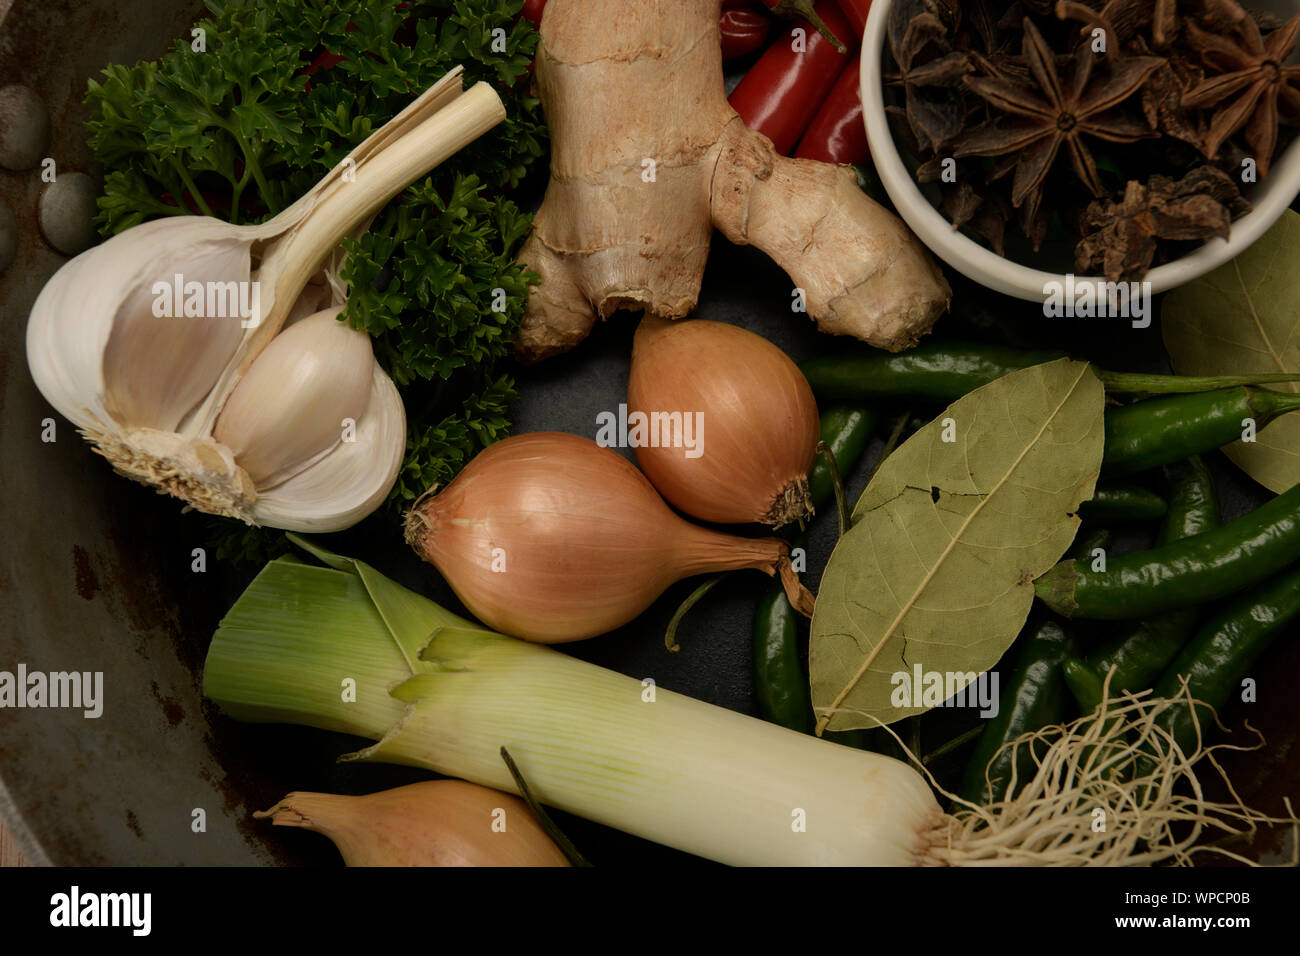 Close up, group of objects, food preparation, cooking ingredients in pan, background, illustration, tasty, flavour Stock Photo